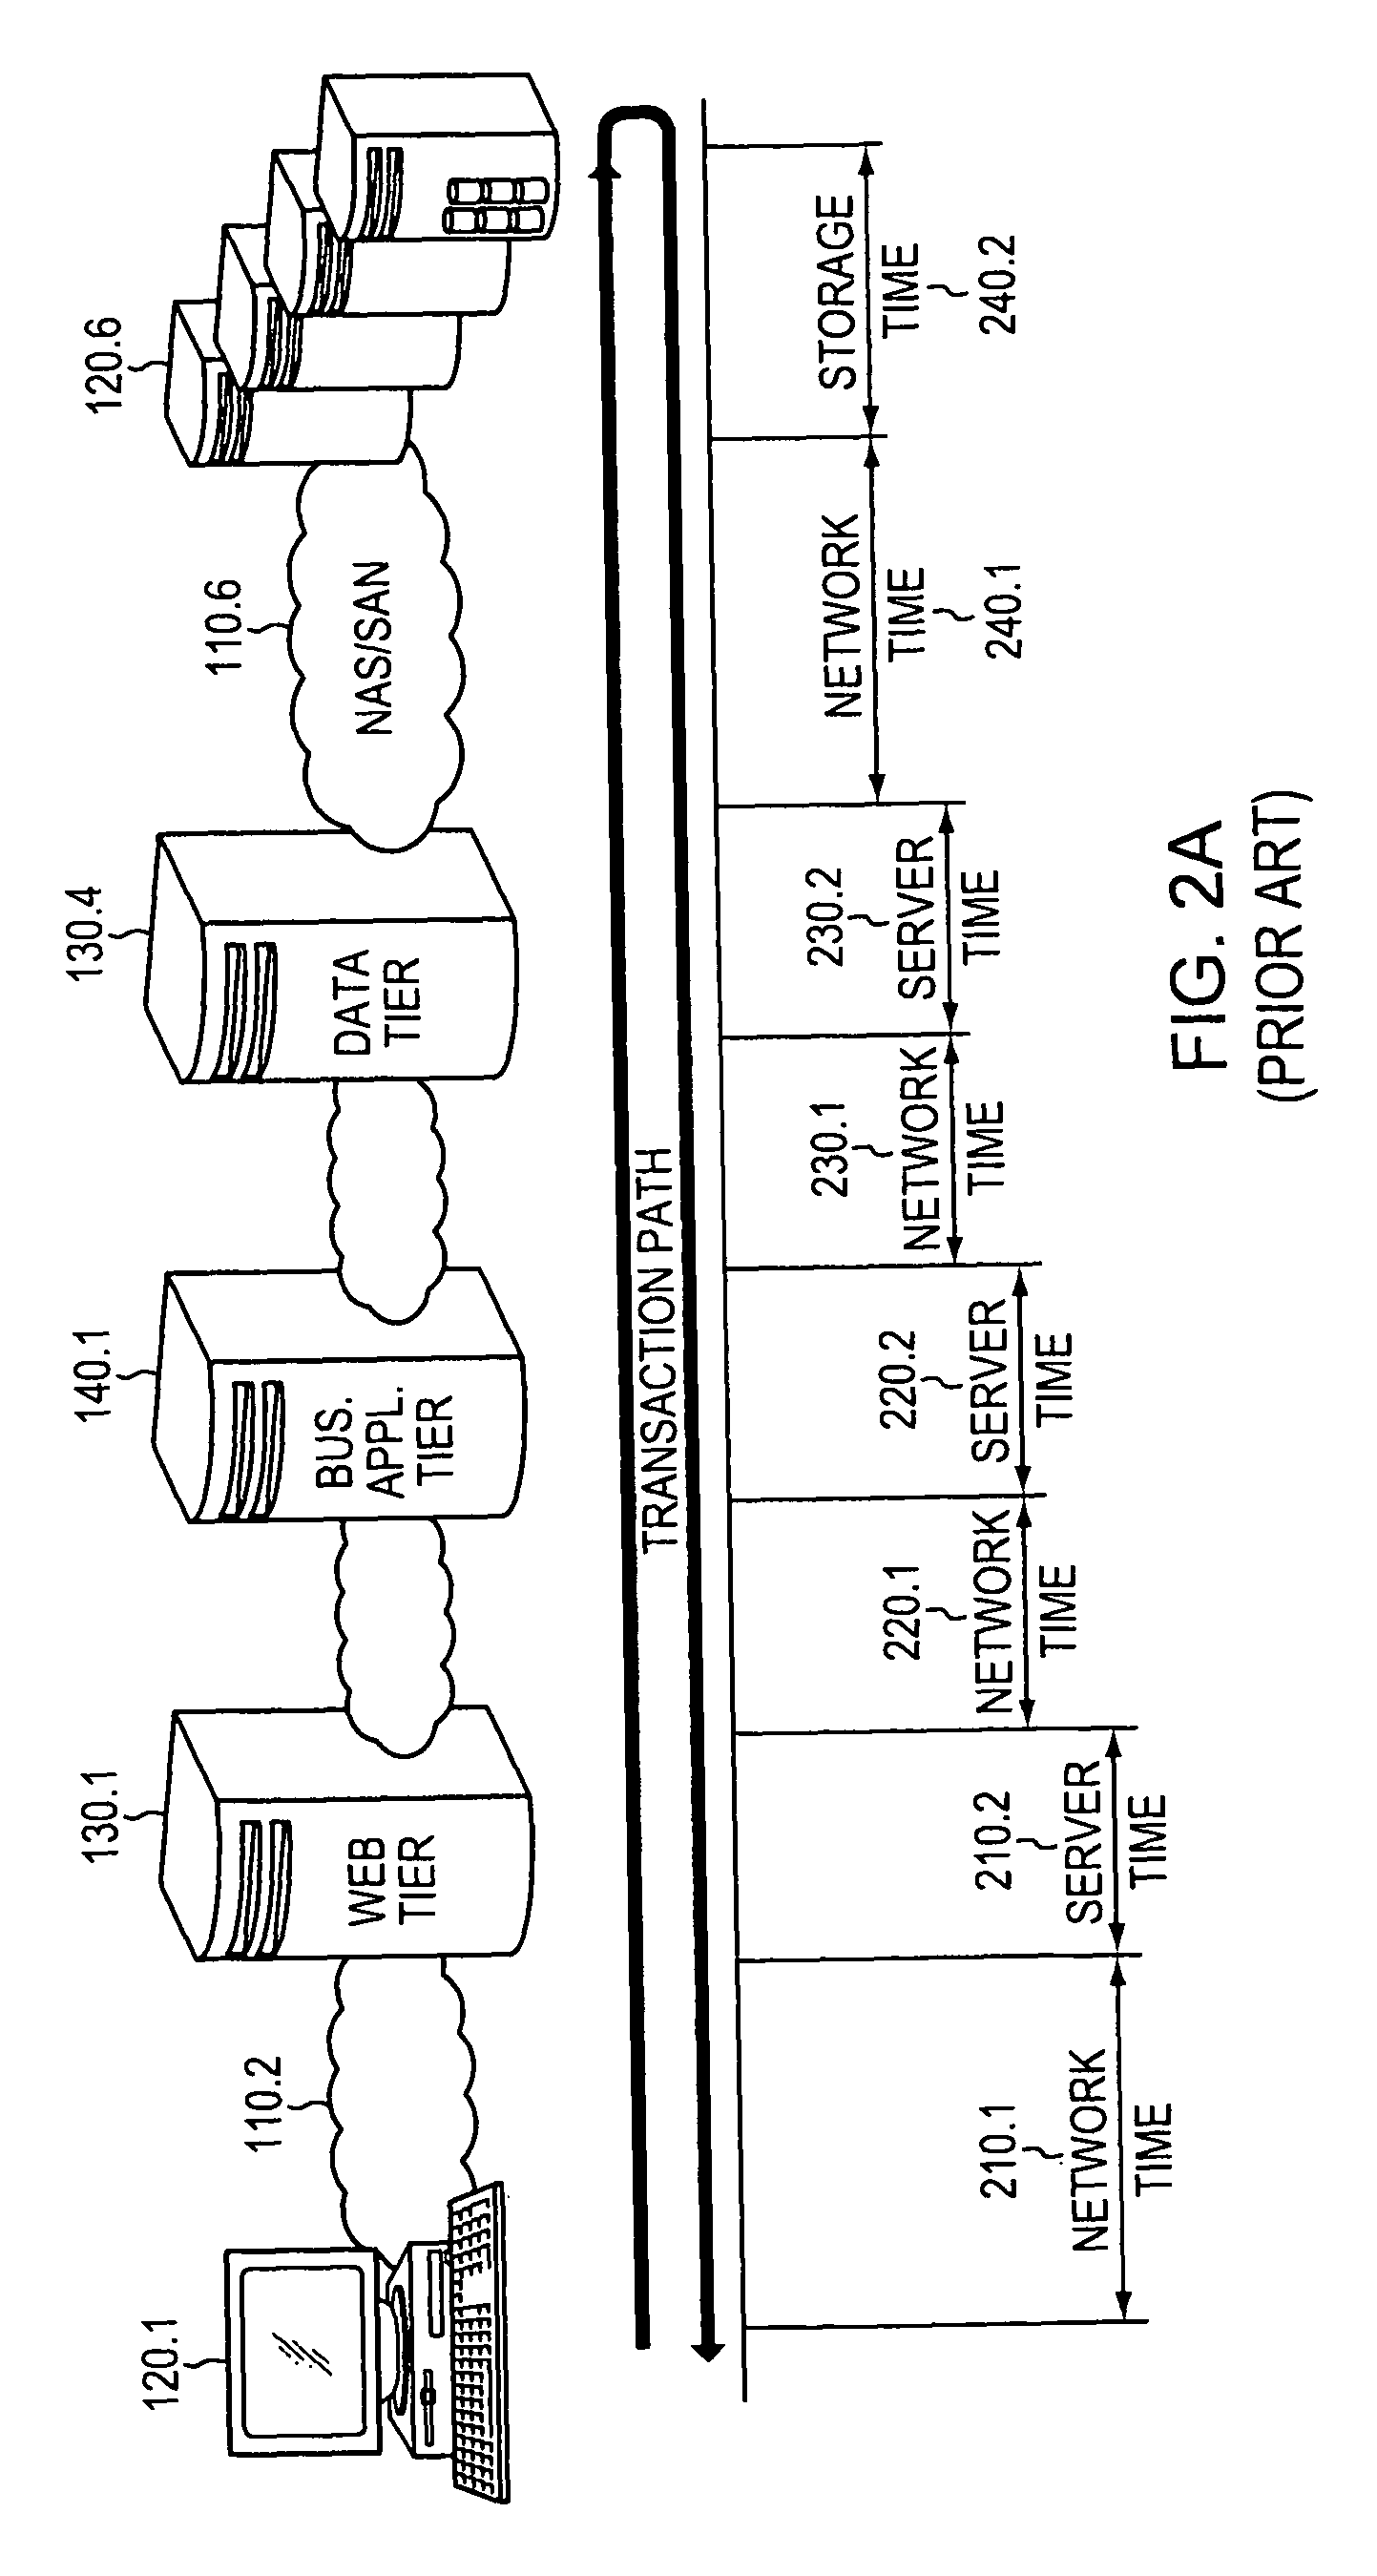 Method and apparatus for mapping and identifying the root causes of performance problems in network-based services